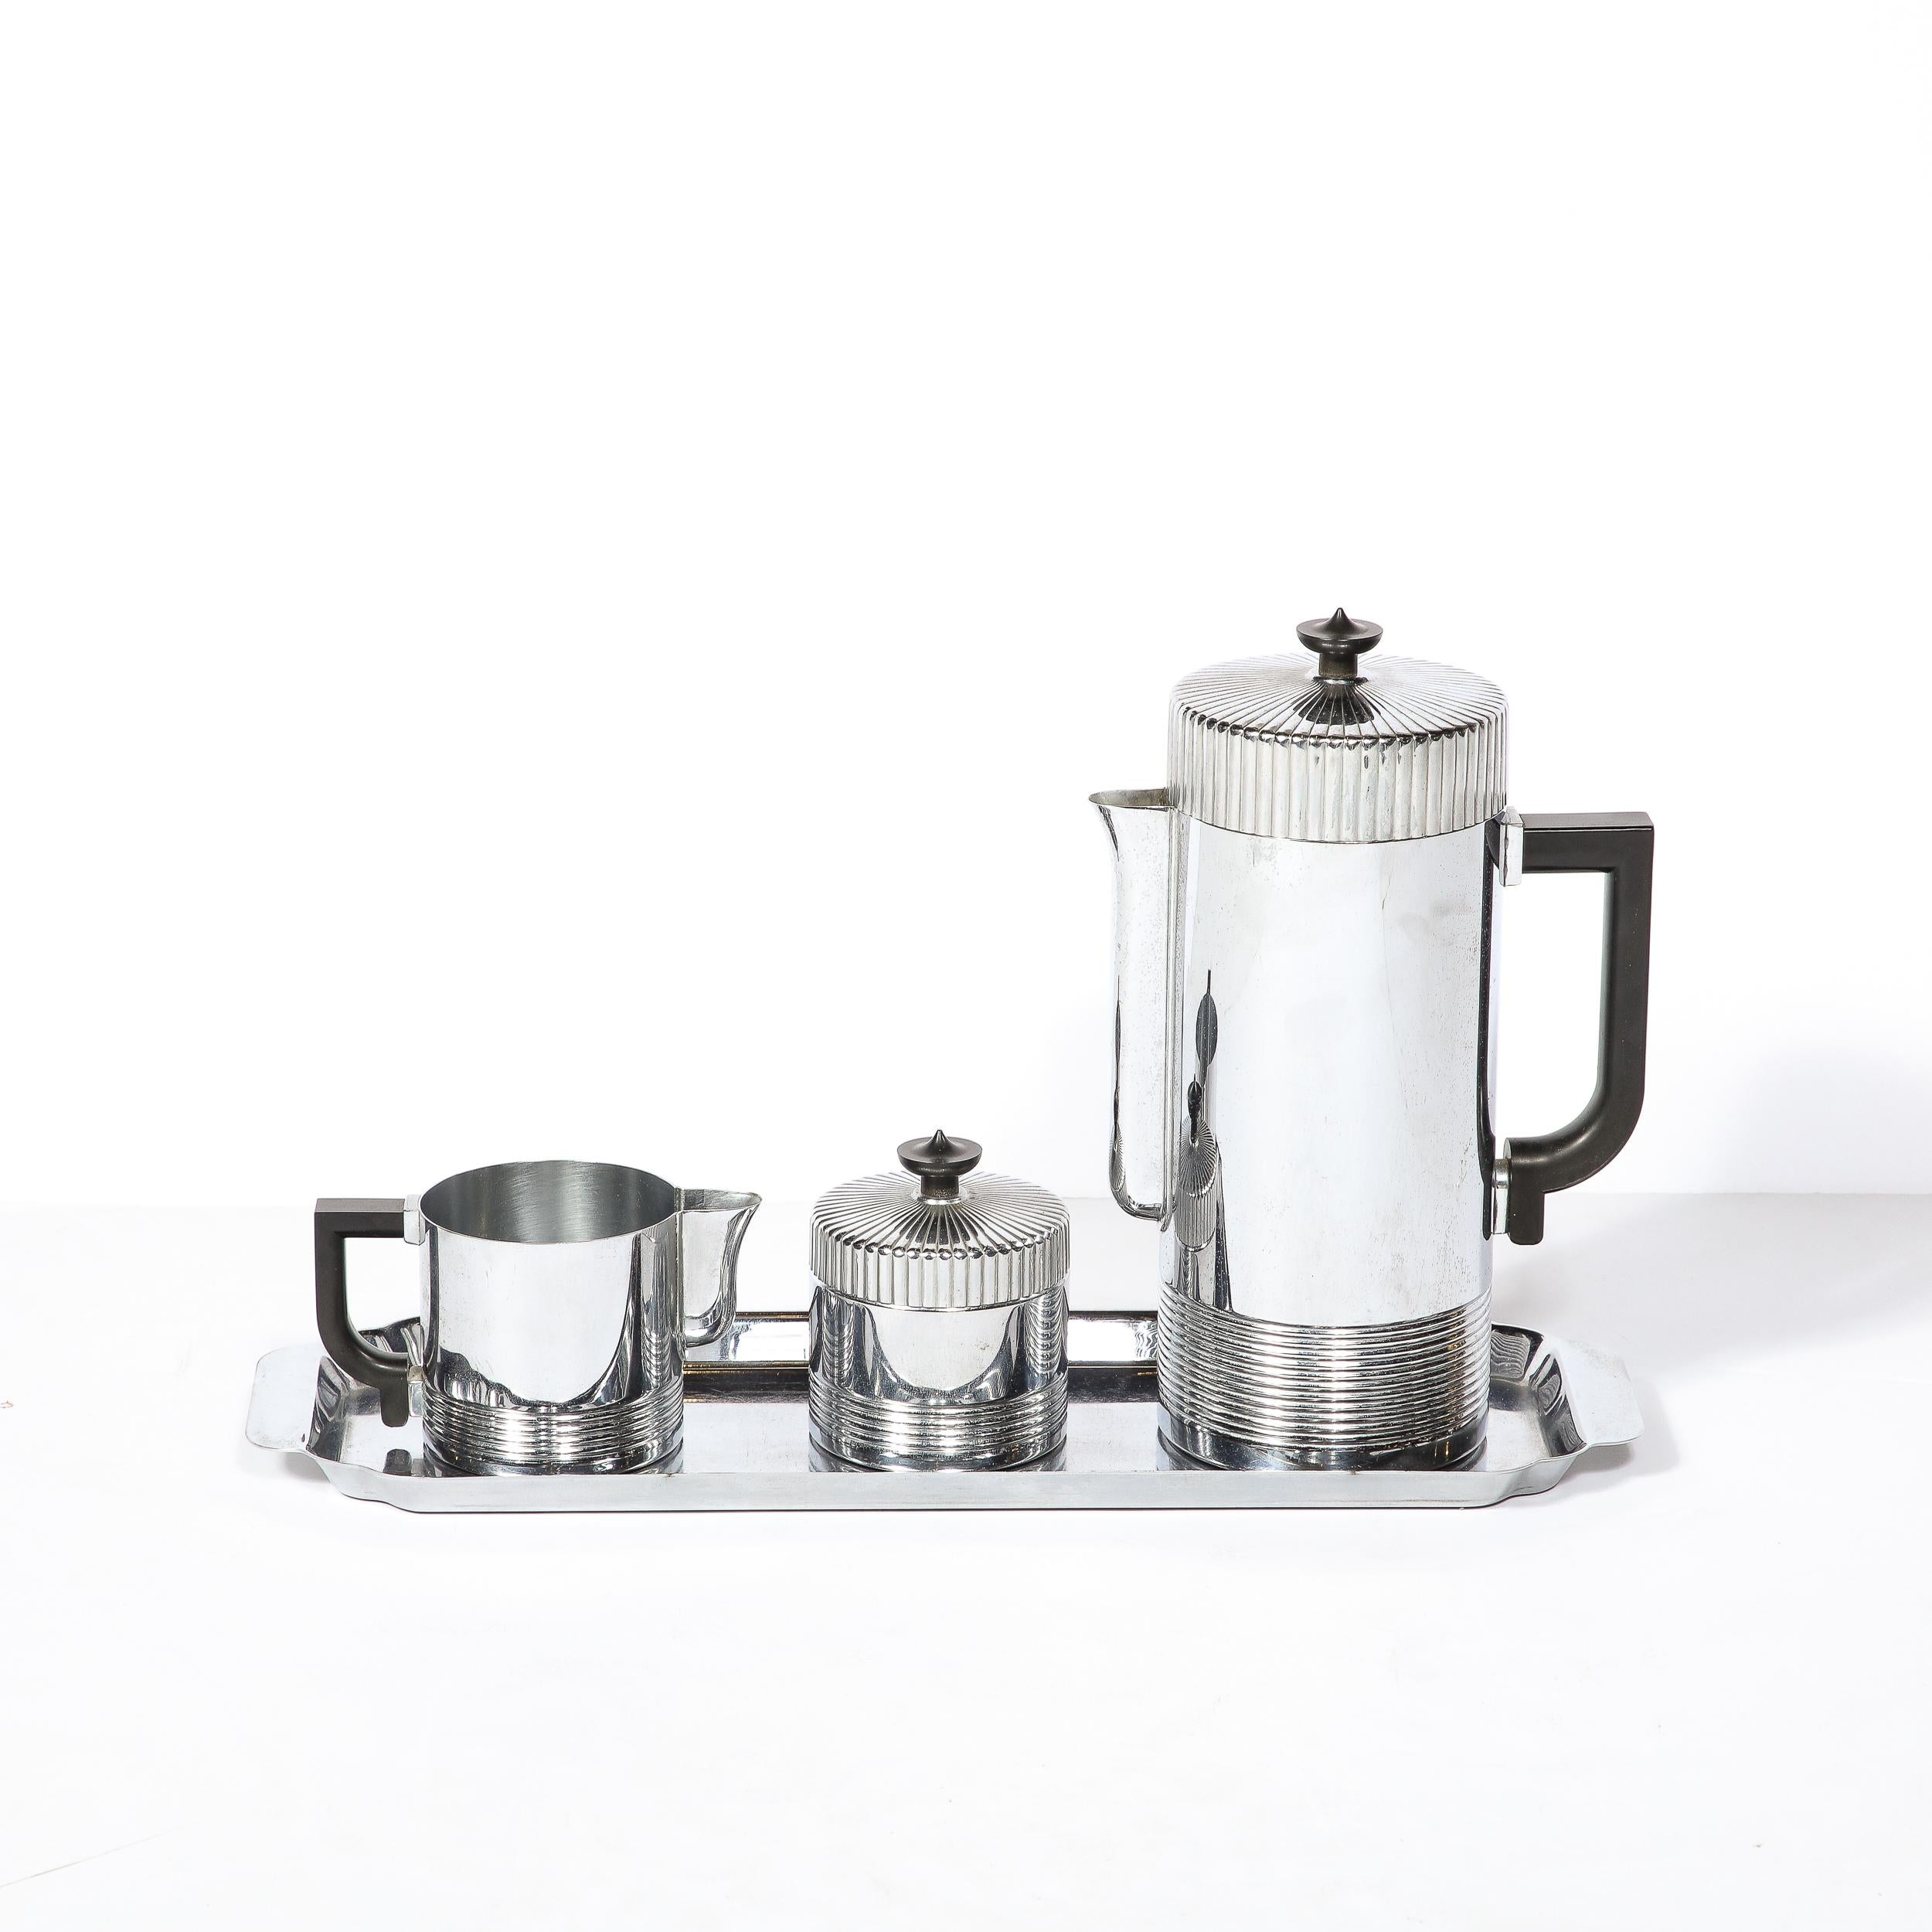 Excellent example of Streamline Art Deco design, this coffee service was manufactured by Chase in the United States circa 1930. Composed of four pieces - a coffee maker with percolator function and cream pot, a sugar vessel, and a serving tray –